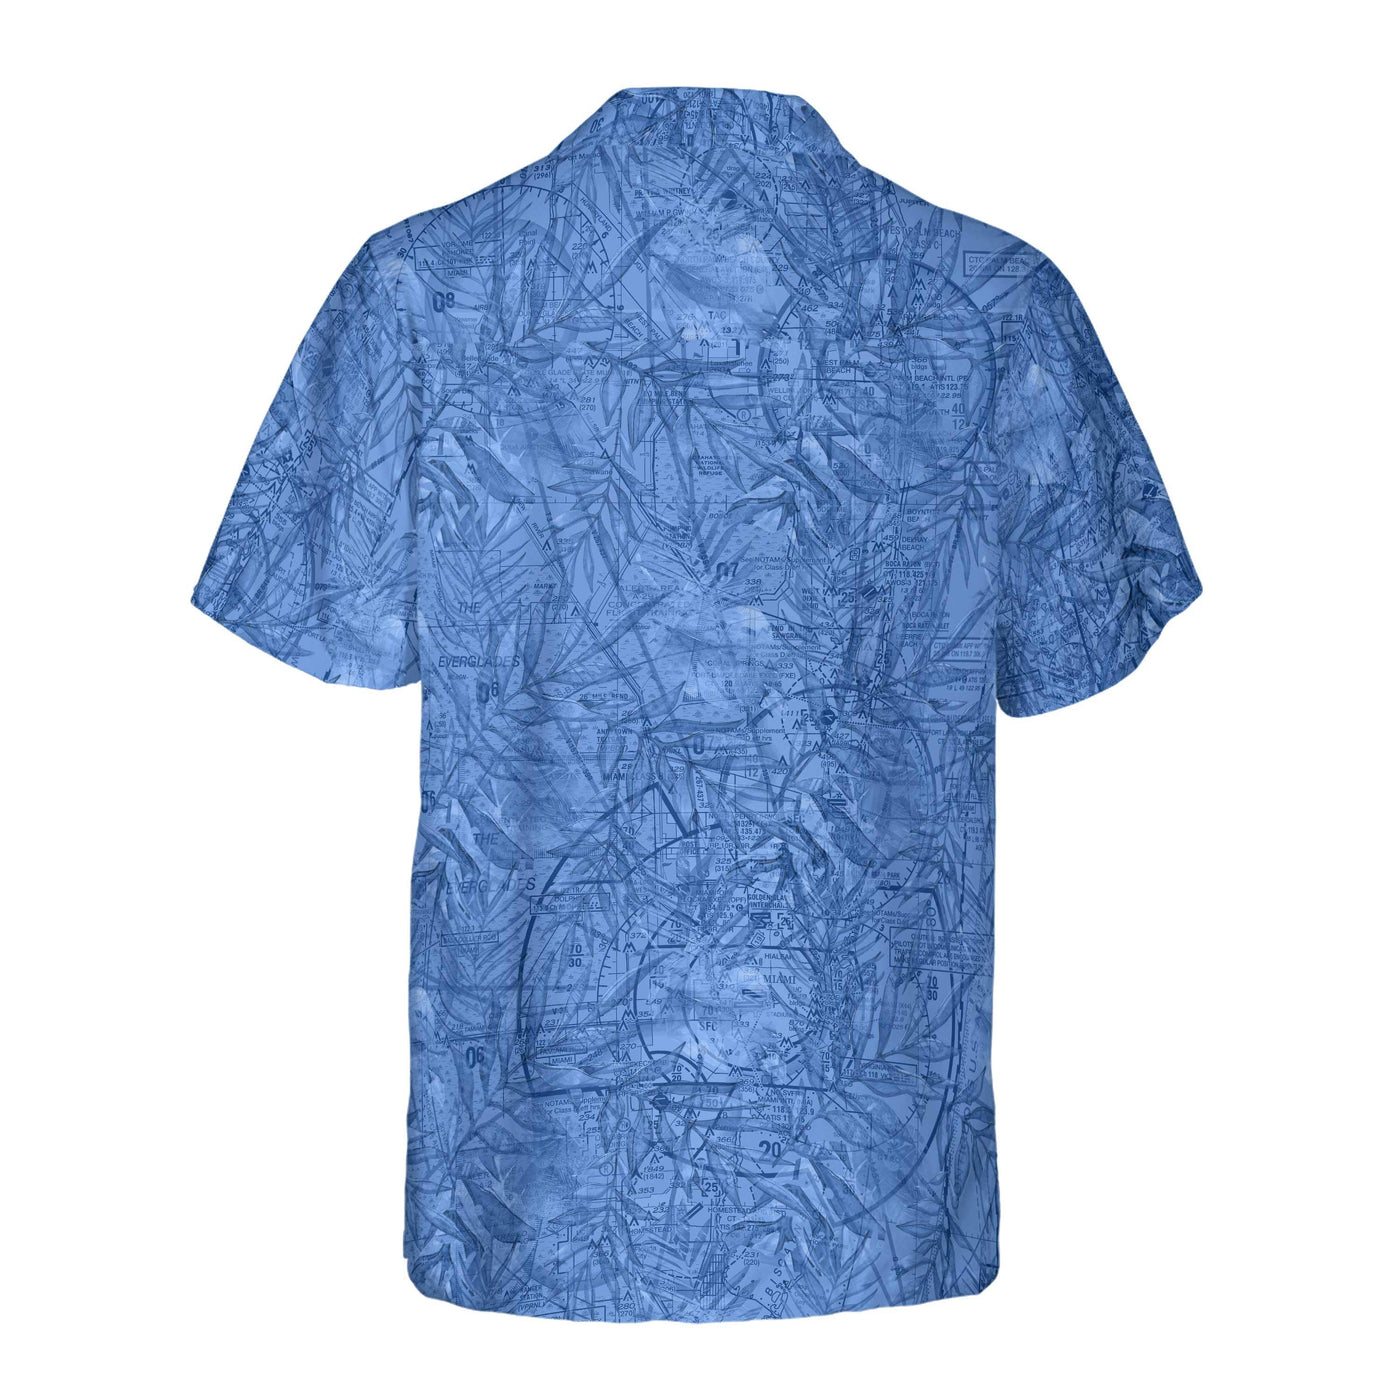 AOP Coconut Button Shirt The Orlando to Ft Lauderdale Blue Skies Coconut Button Camp Shirt